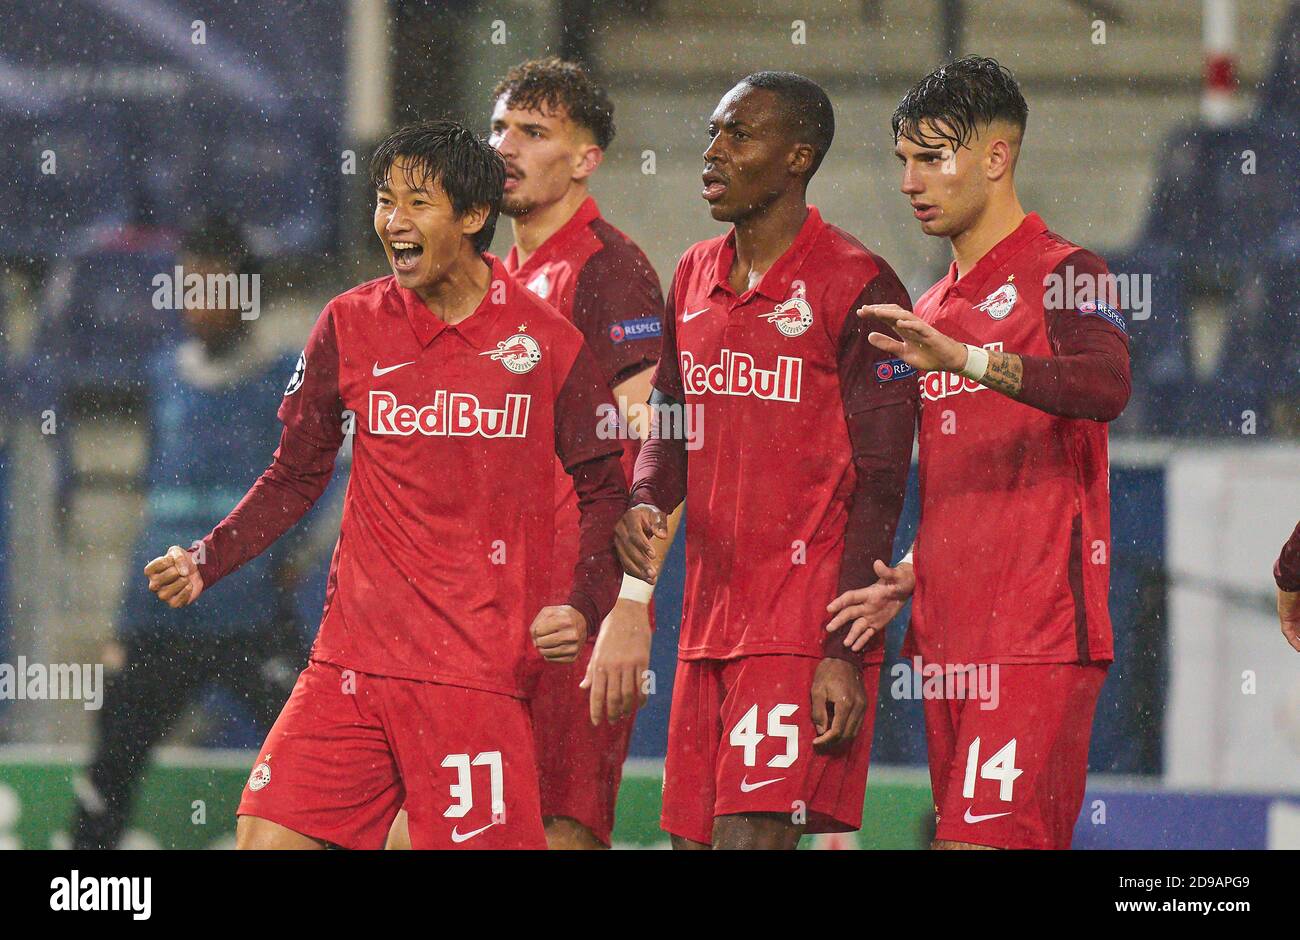 Salzburg, Austria, November 3, 2020.Masaya OKUGAWA, FC Salzburg Nr. 37   scores, shoots goal for , Tor, Treffer, 2-2, celebrates his goal, happy, laugh, celebration,  in the match  FC SALZBURG - FC BAYERN MUENCHEN  of football UEFA Champions League group stage in season 2020/2021 in Salzburg, Austria, November 3, 2020.   © Peter Schatz / Alamy Live News  Important: National and international News-Agencies OUT Editorial Use ONLY Credit: Peter Schatz/Alamy Live News Stock Photo